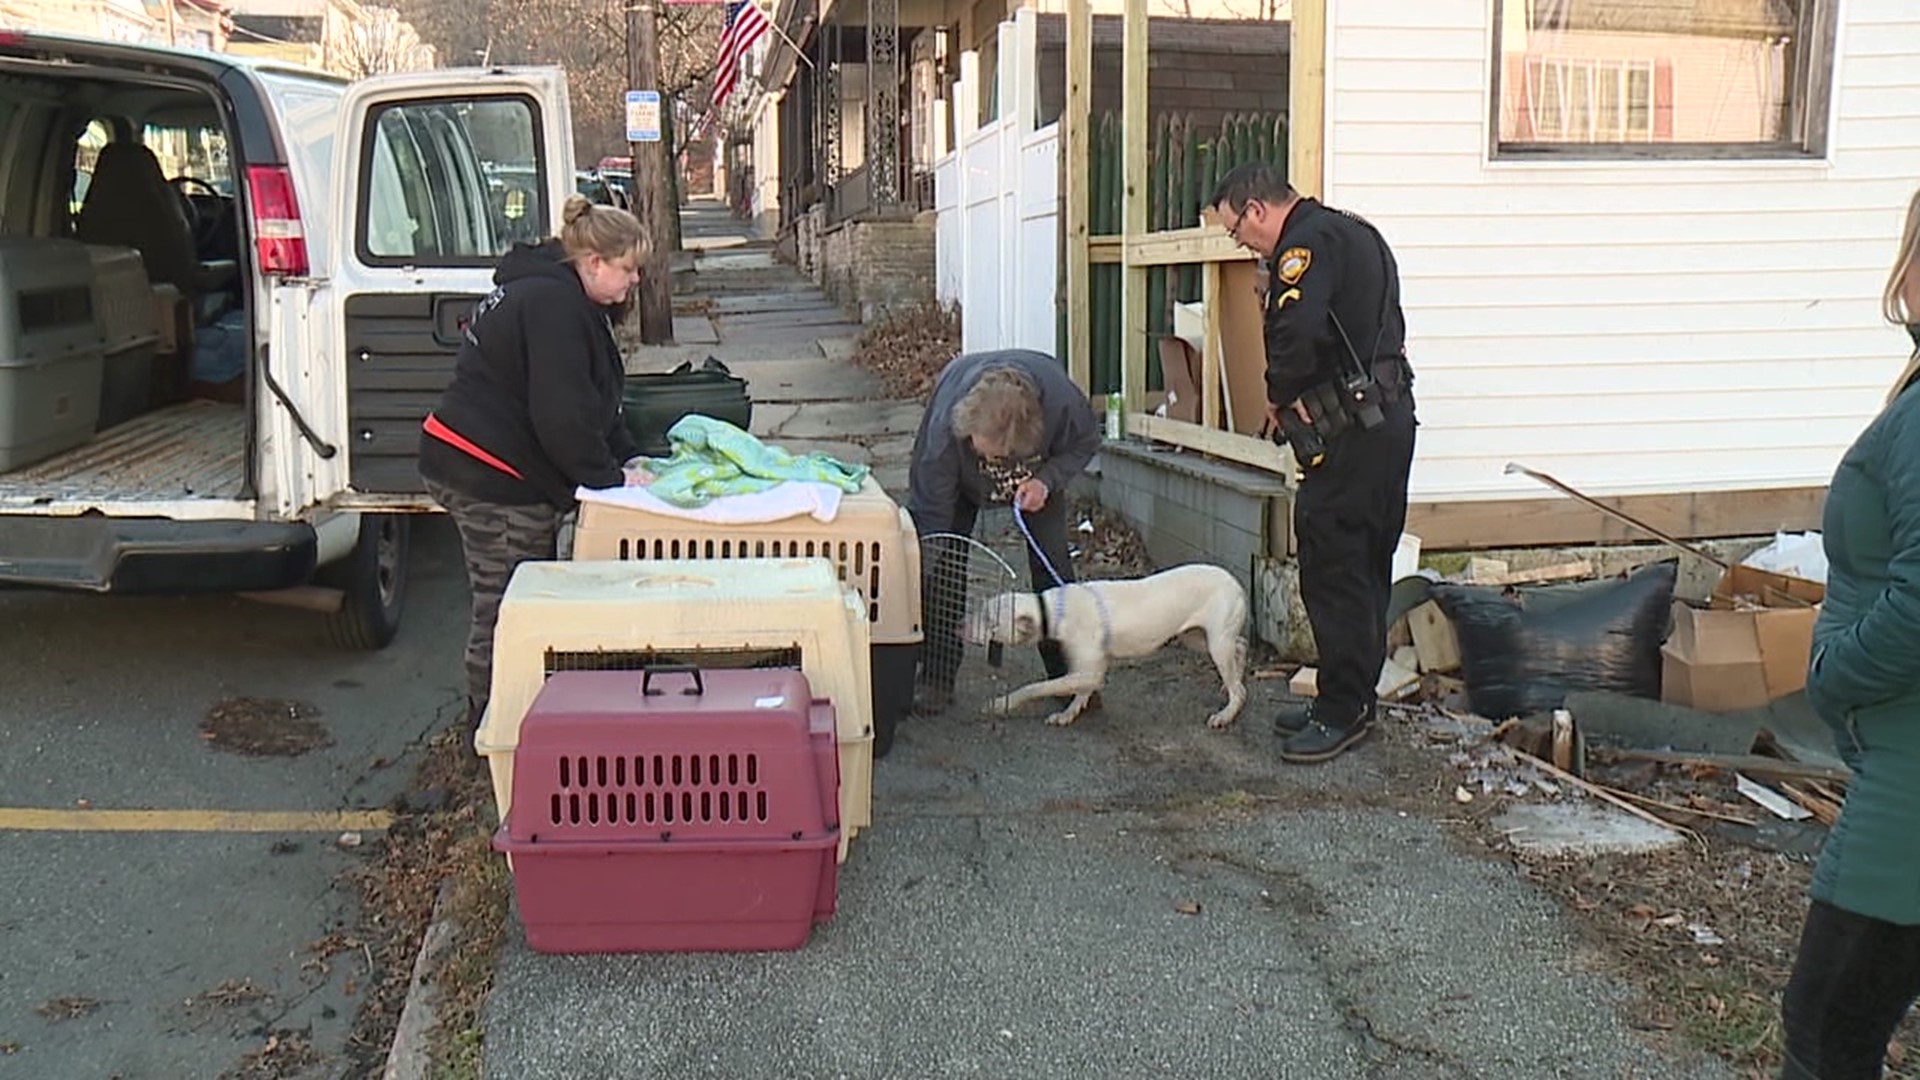 Officers removed dogs removed from a home in Schuylkill County after the owner allegedly tried to set one of the animals loose to attack them.